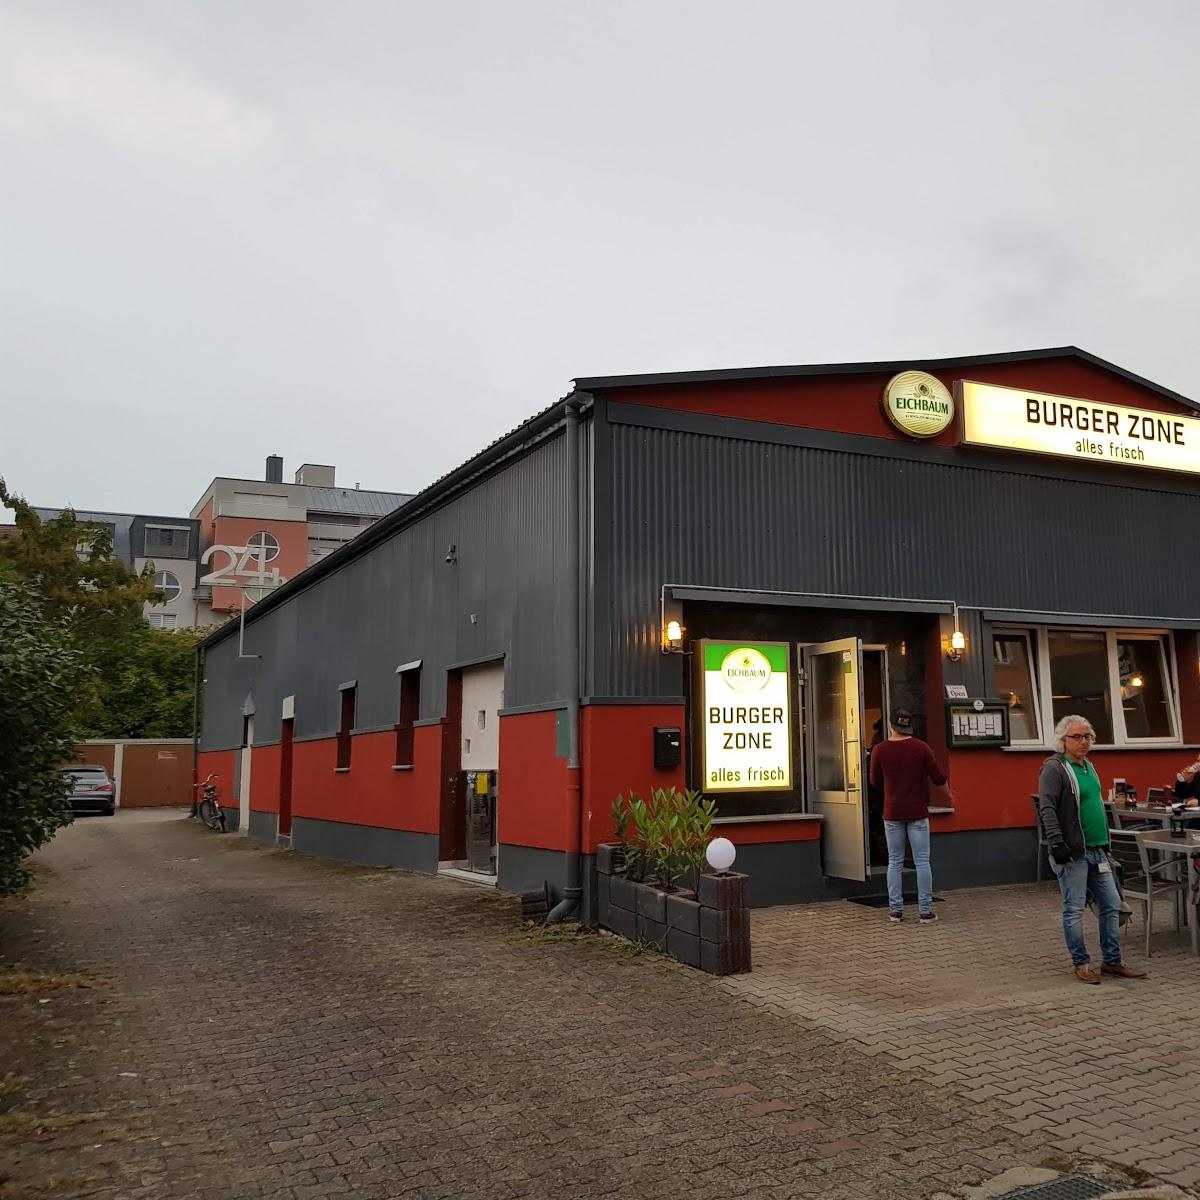 Restaurant "The Burger Zone Gbr- Worms" in  Worms